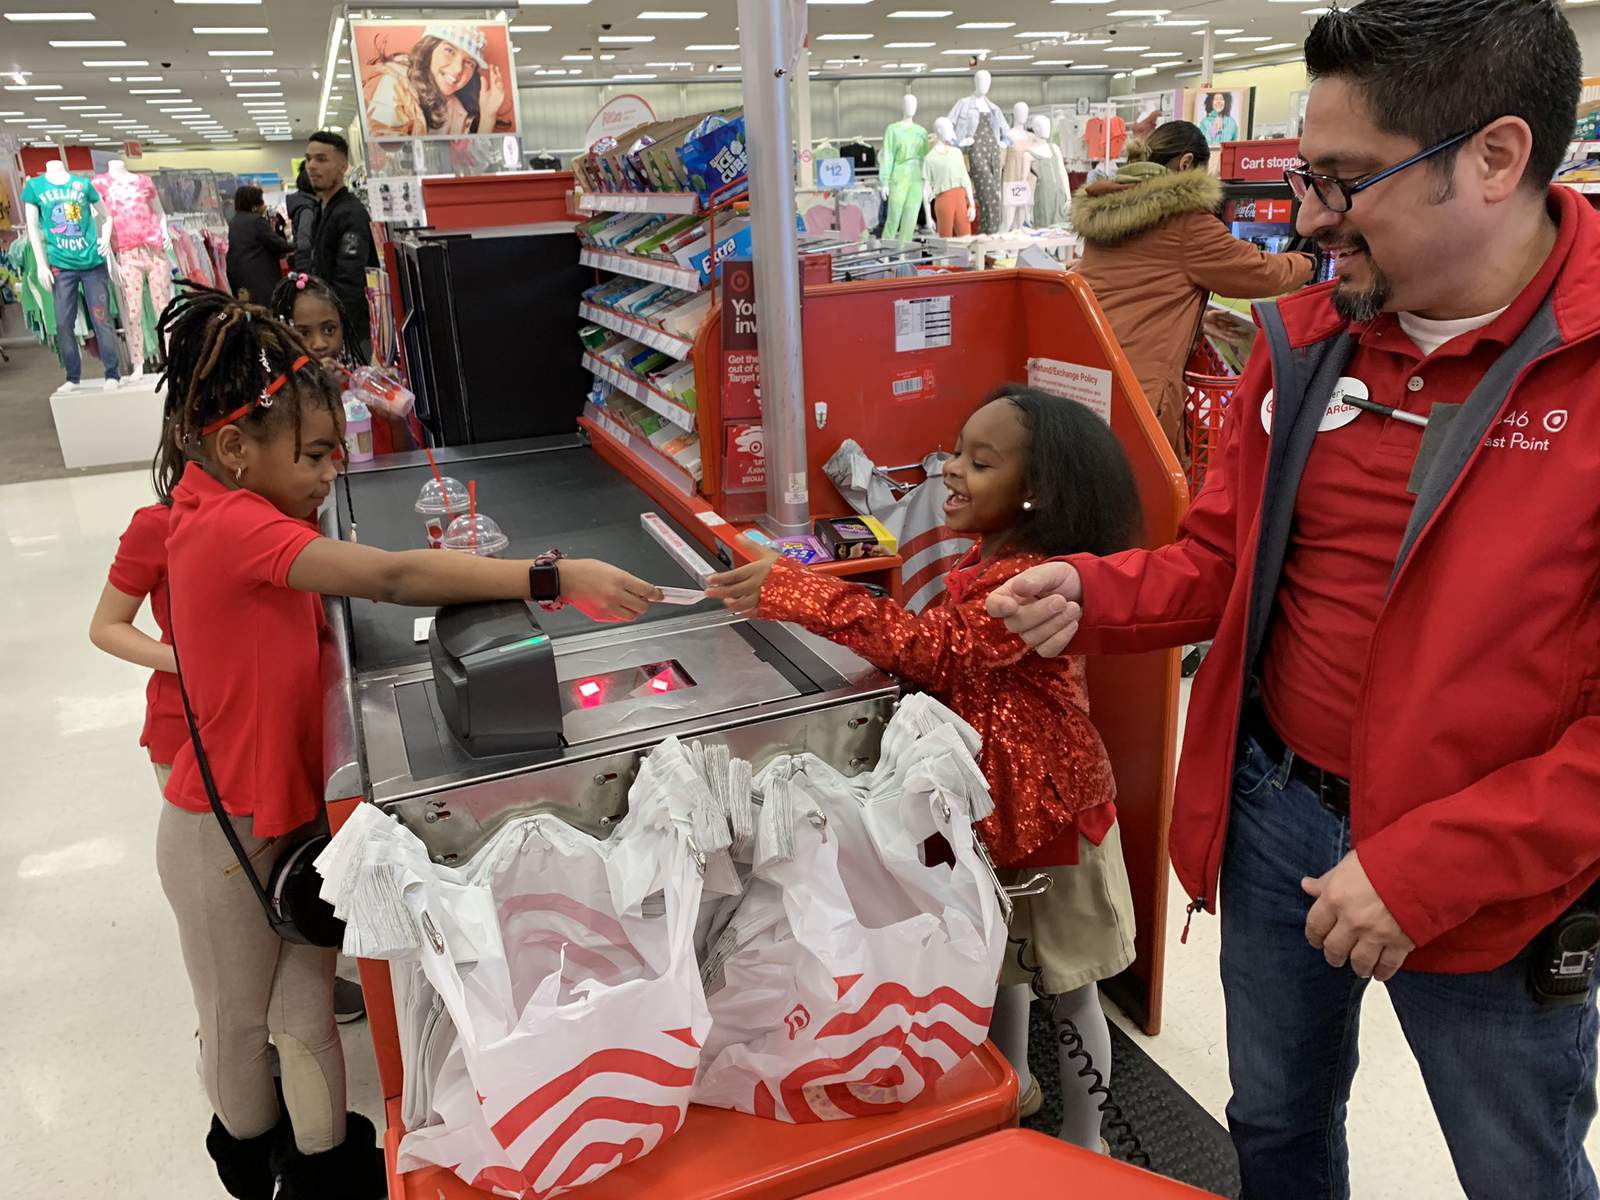 An 8-year-old girl and her friends dressed as Target employees and took over a store for her birthday